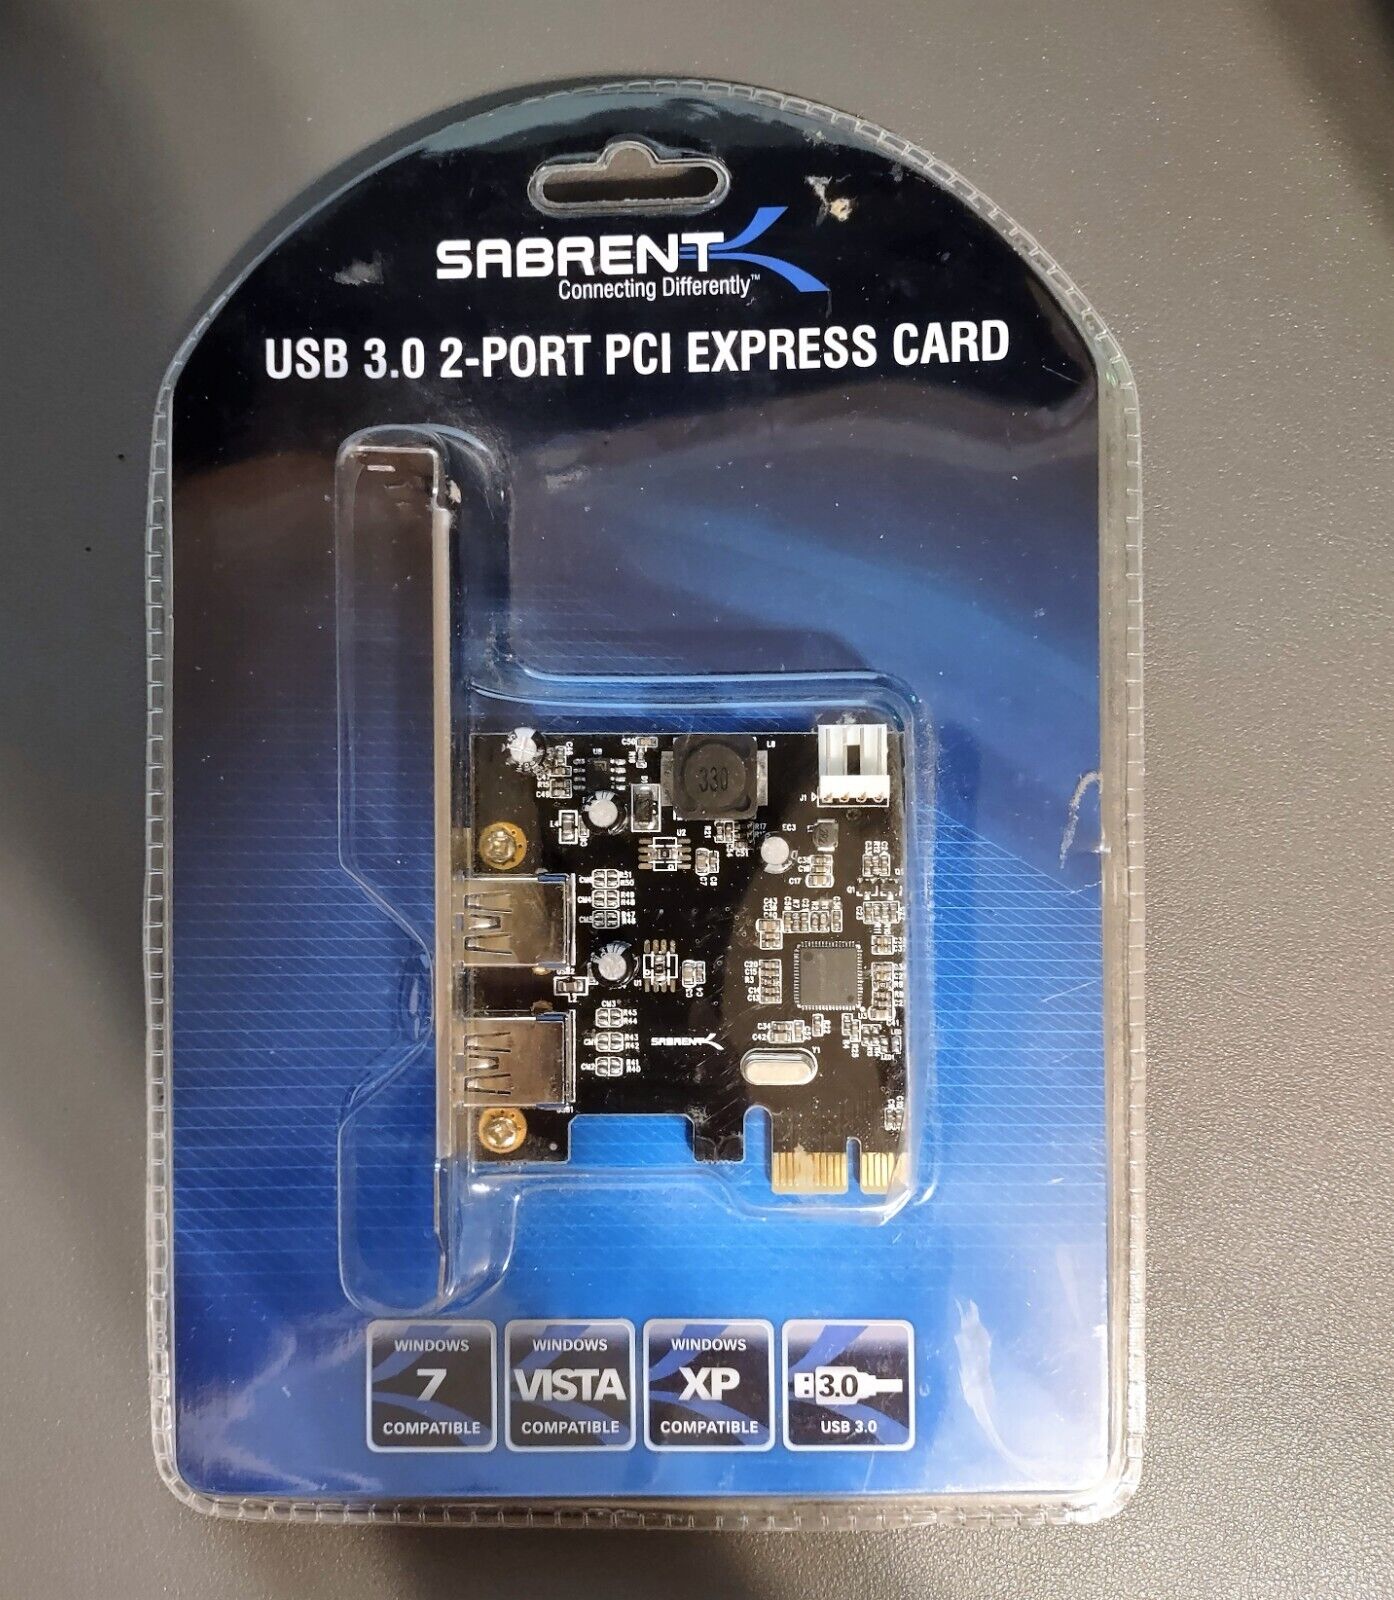 Sabrent USB 3.0 2-Port PCI Express Card New in Packaging Windows 7/Vista/XP 